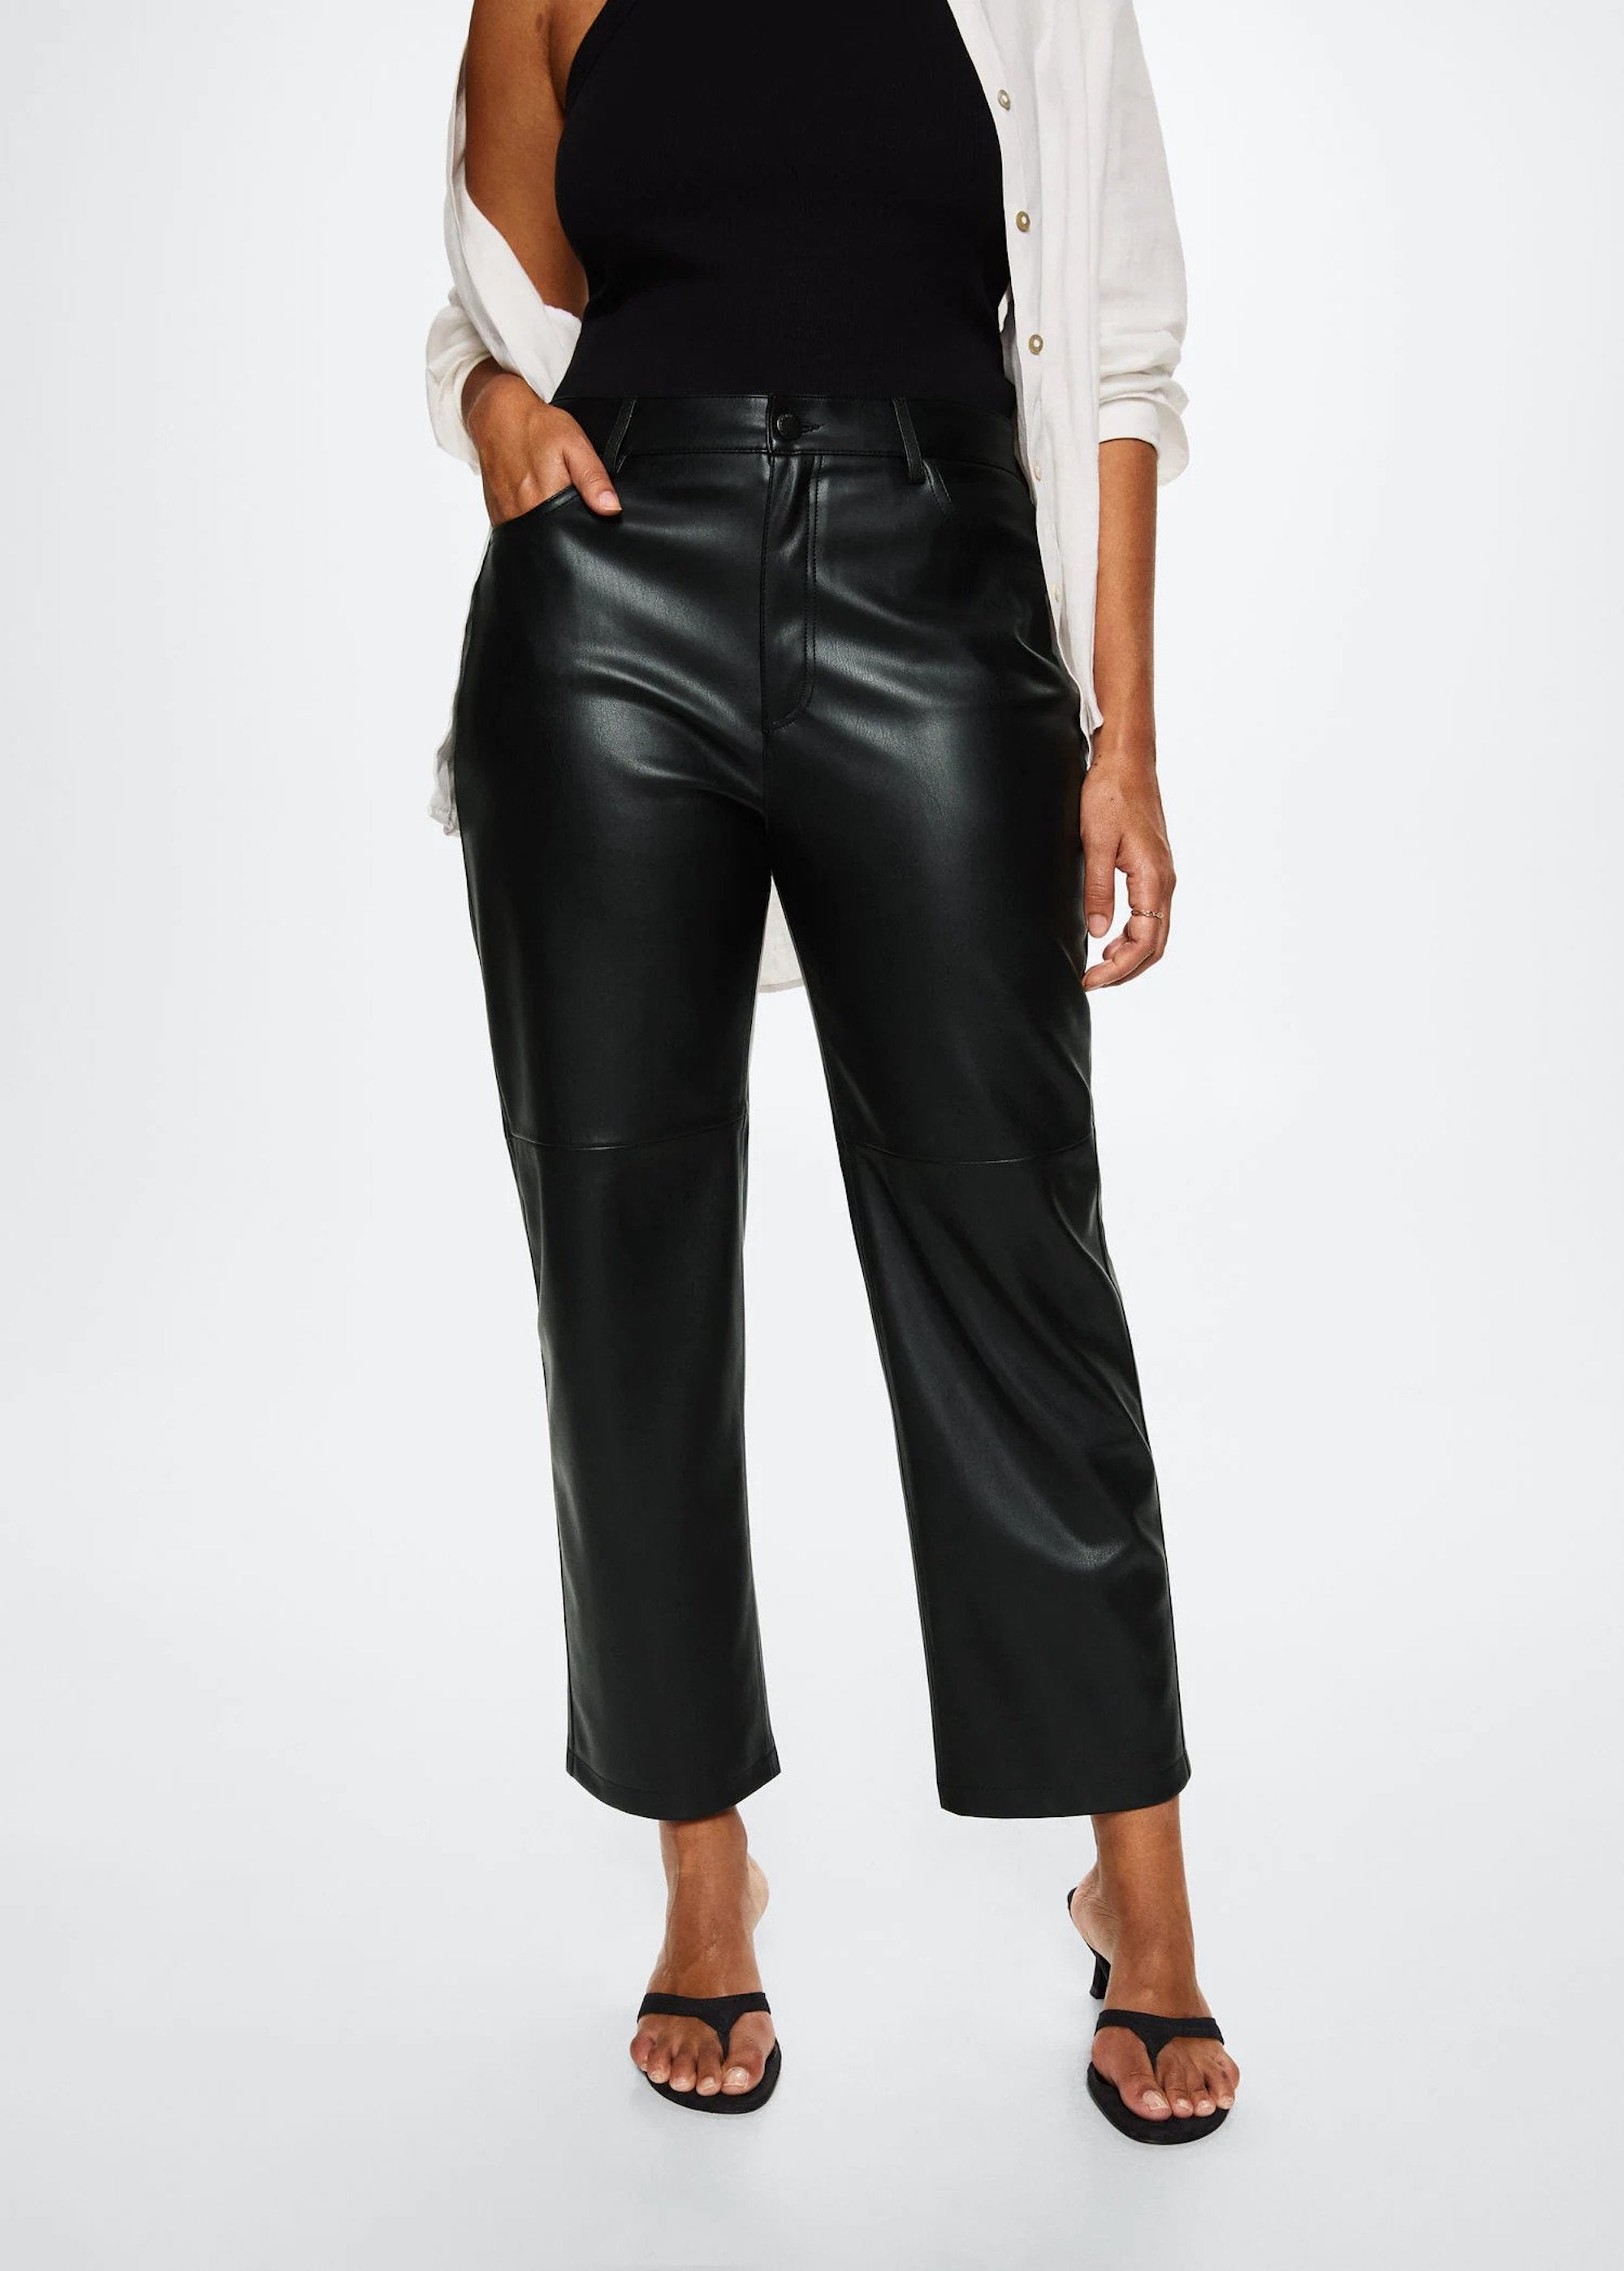 Mango + Faux Leather Trousers